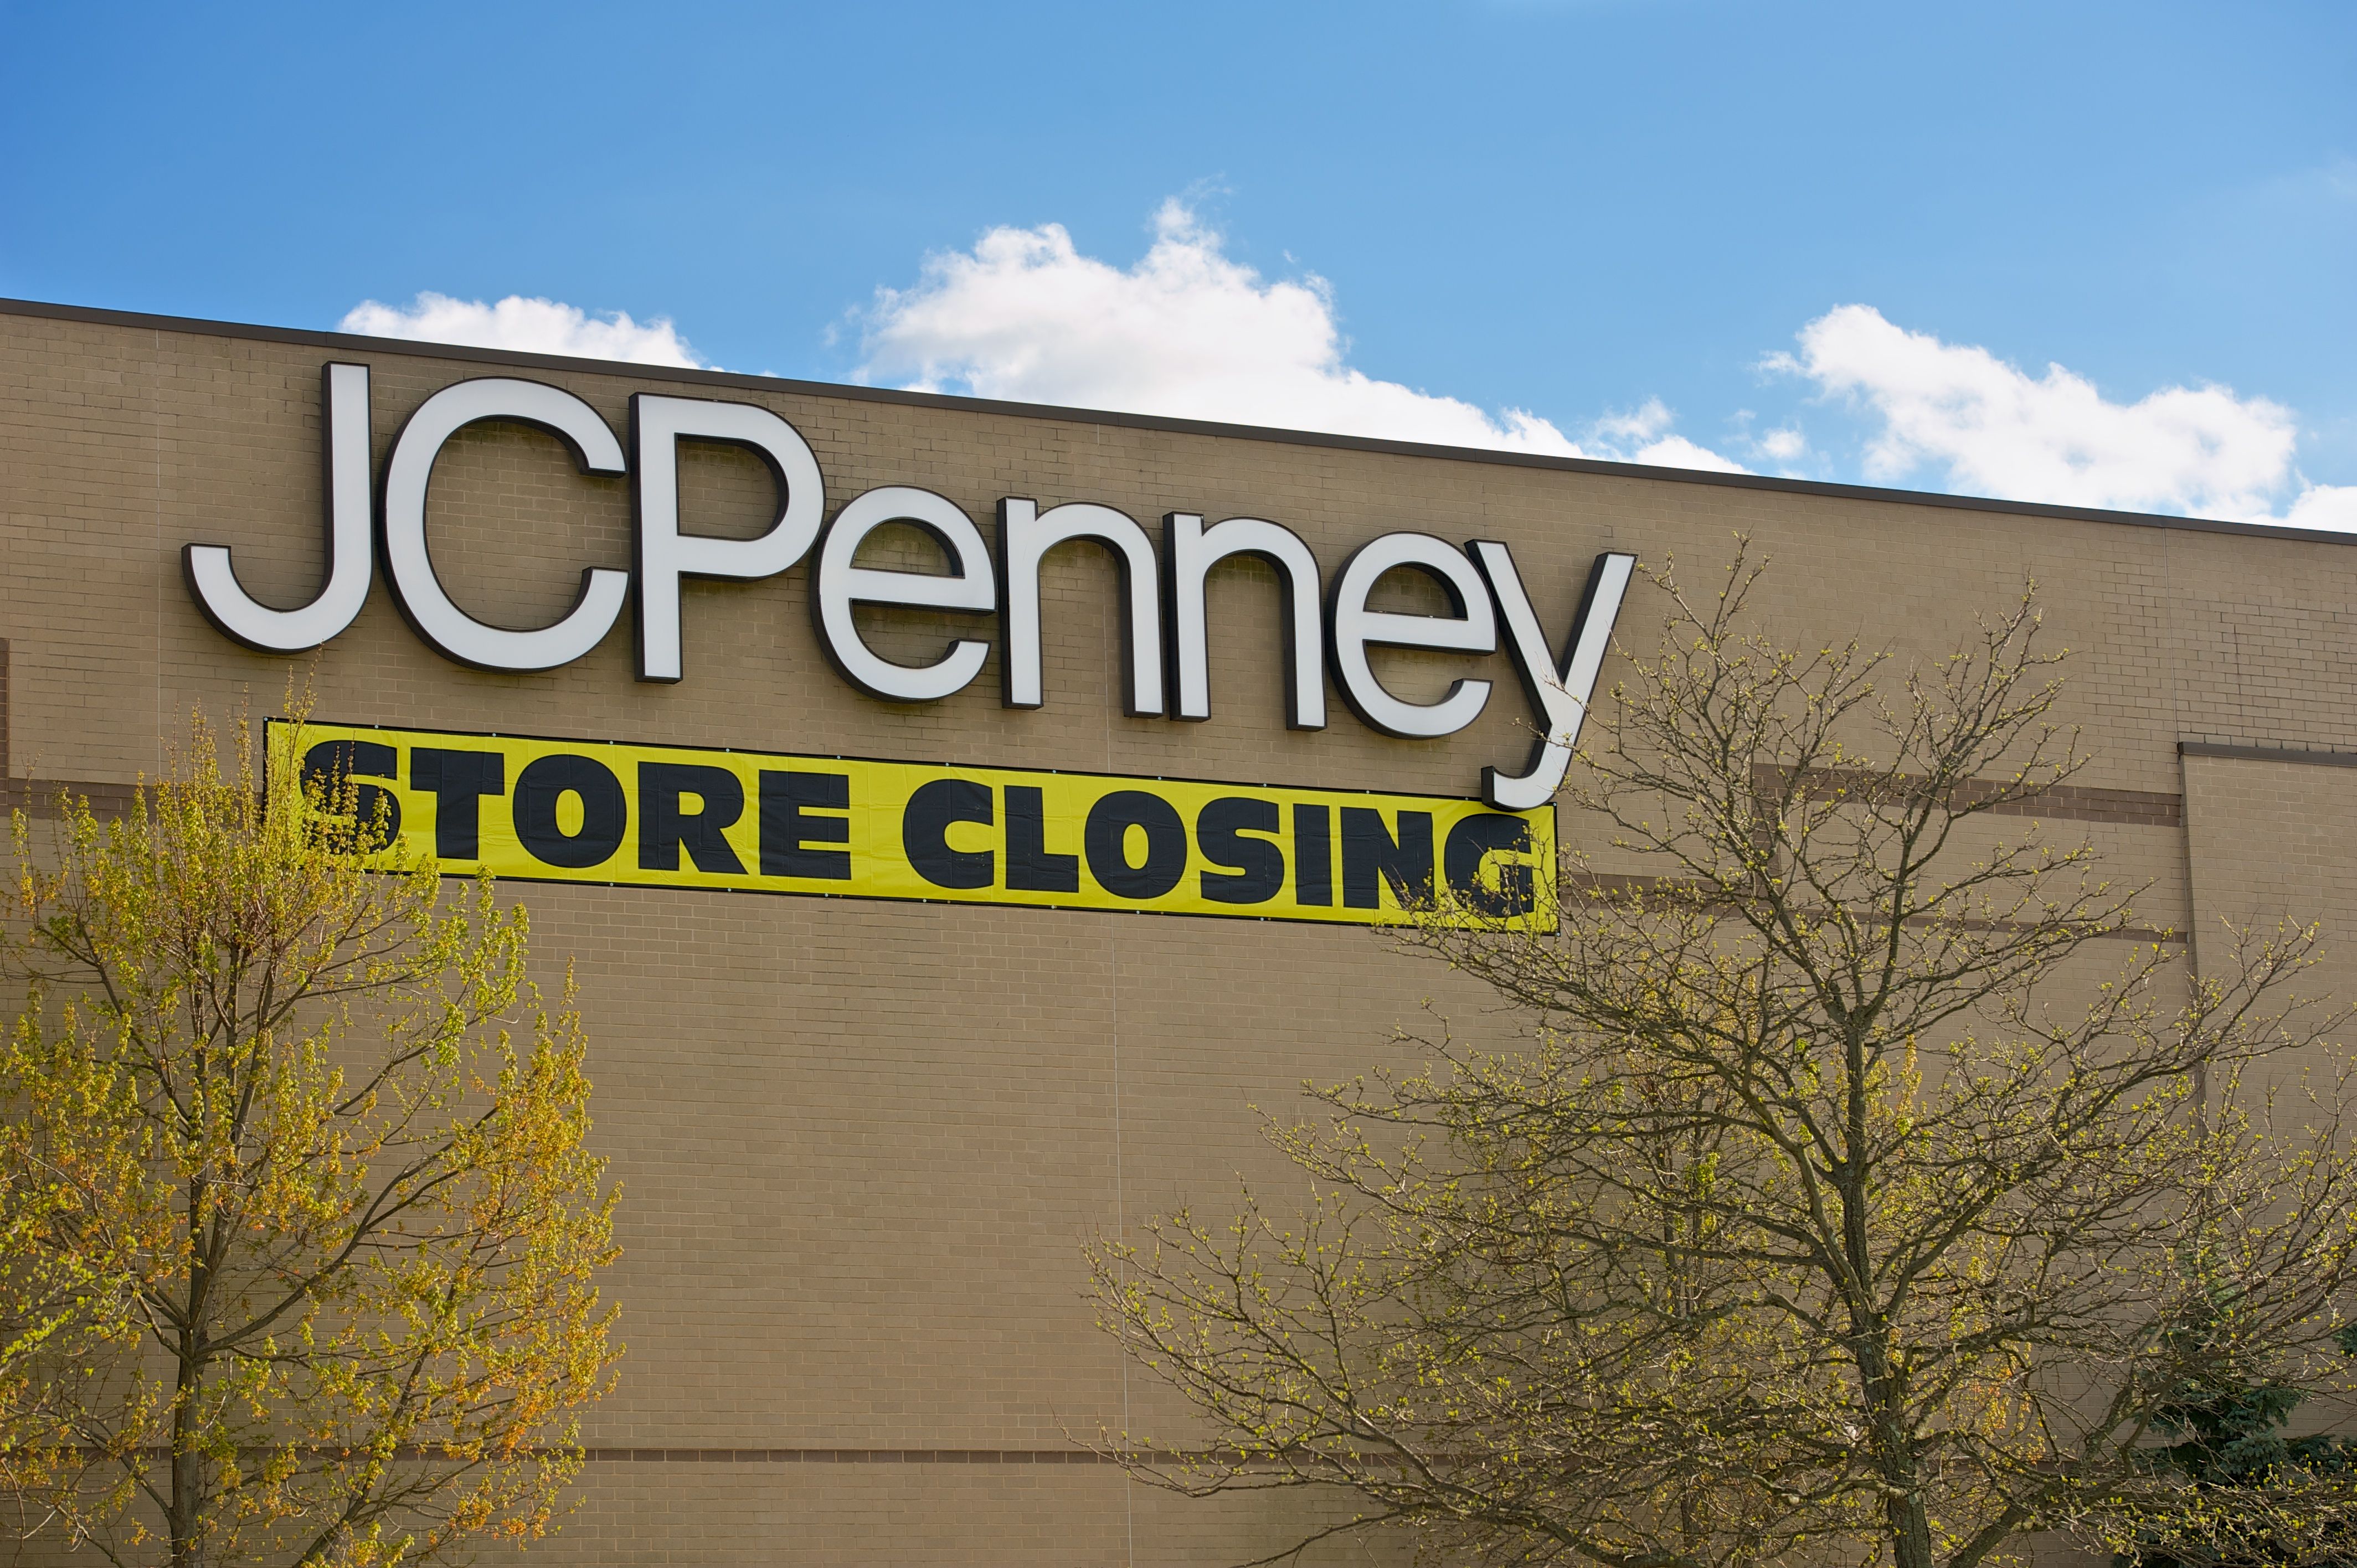 JC Penney Store Closings 